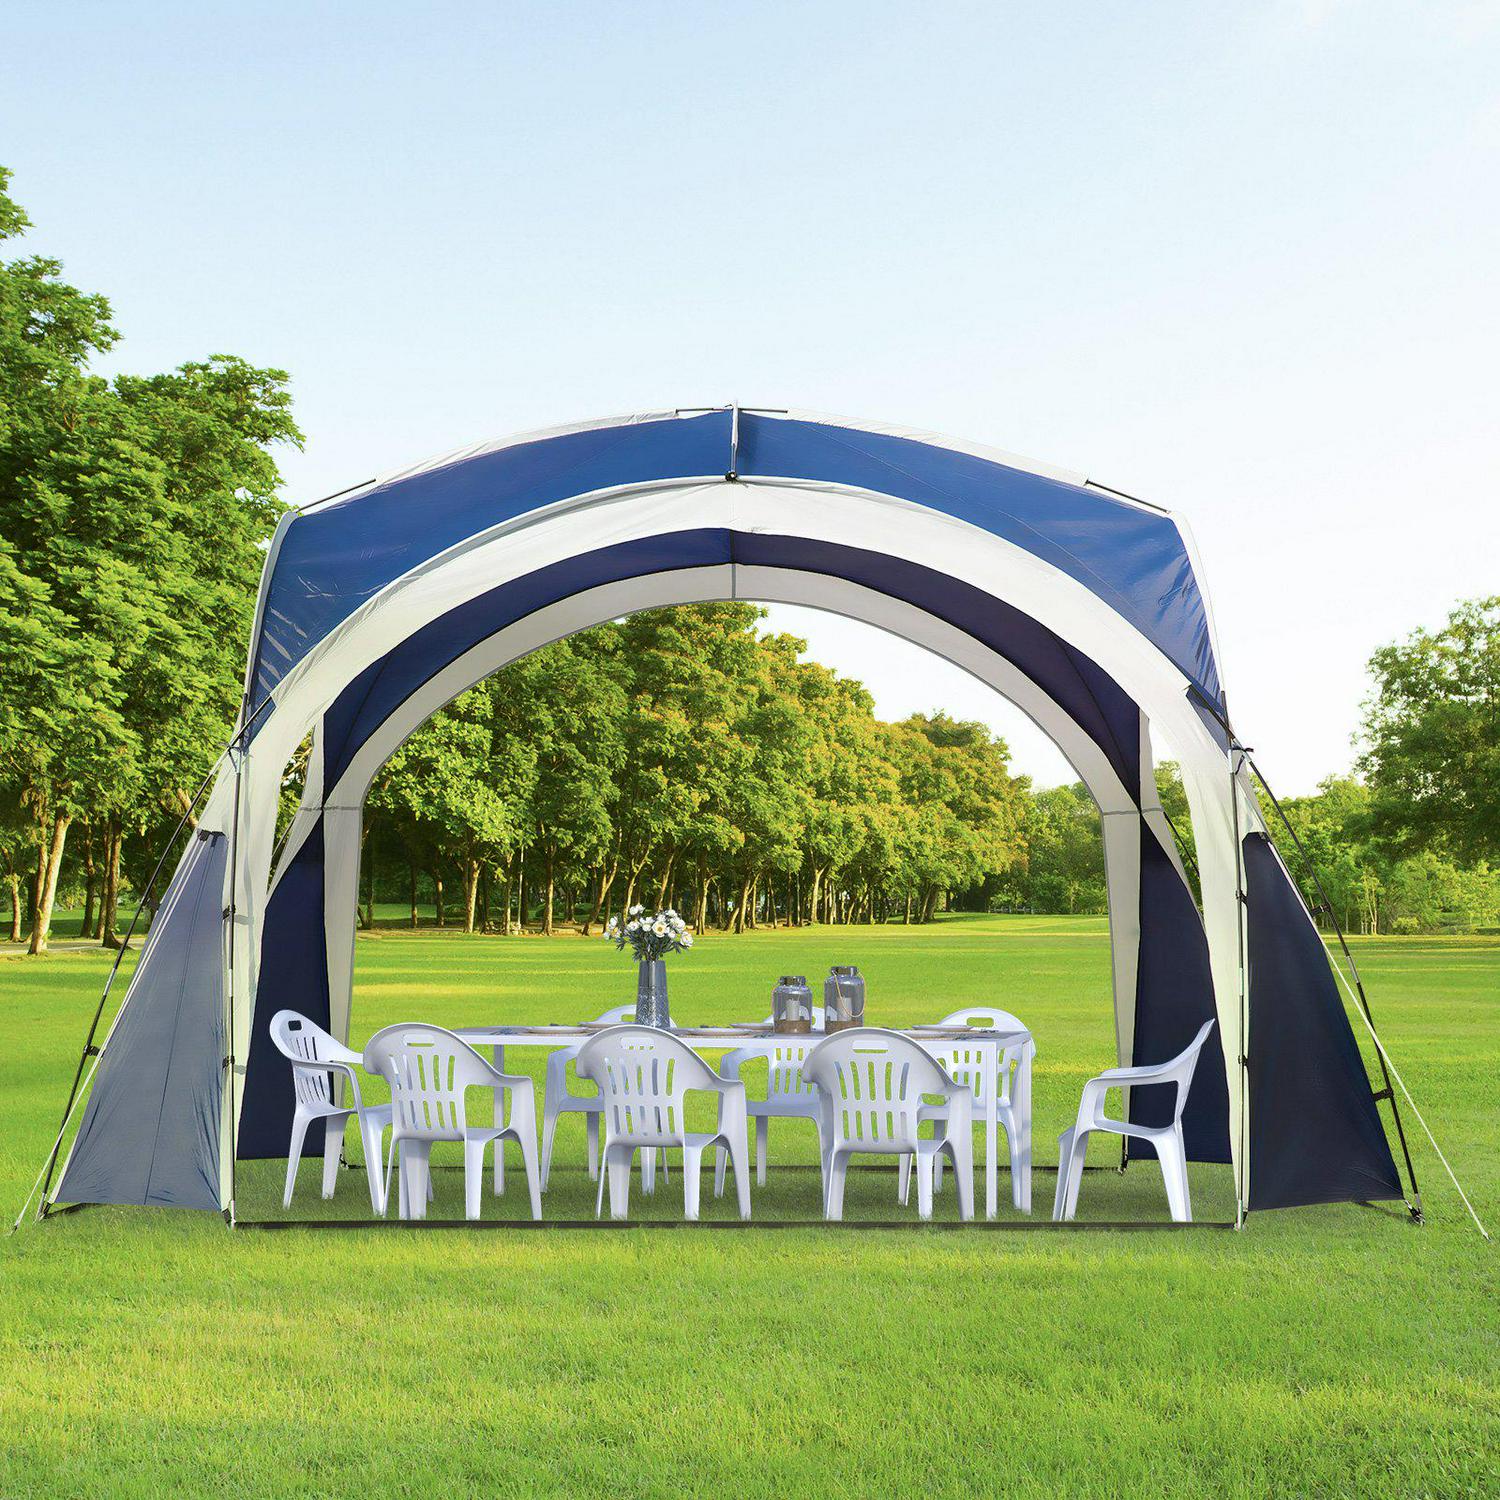 Outdoor Gazebo Event Dome Shelter Party Tent- Blue And Grey